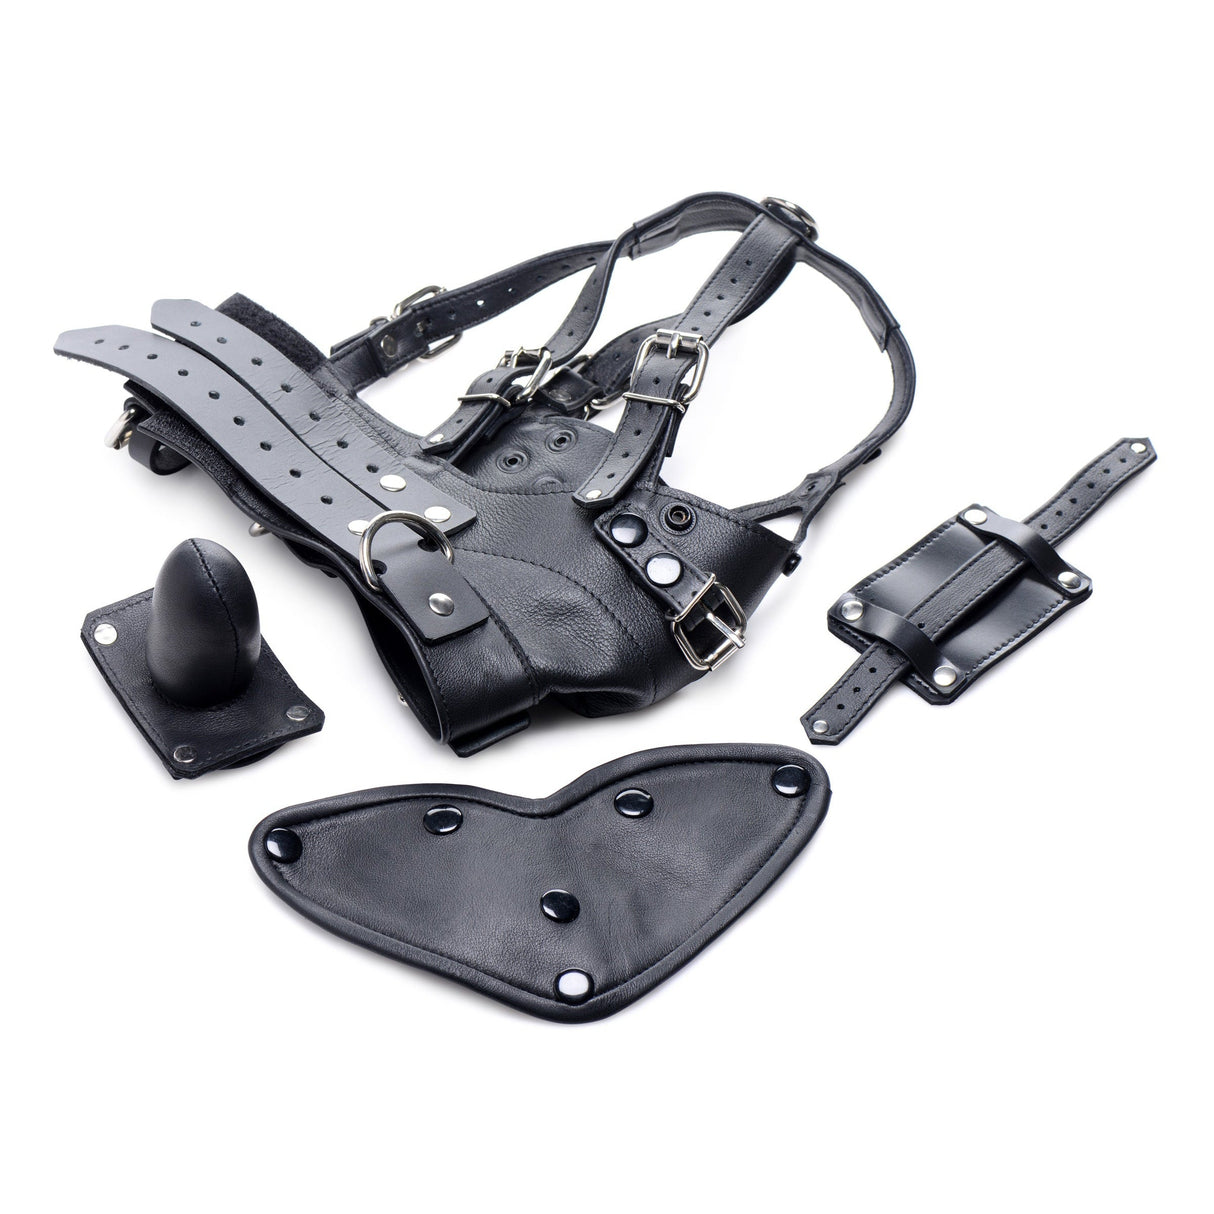 Leather Head Harness with Removeable Gag